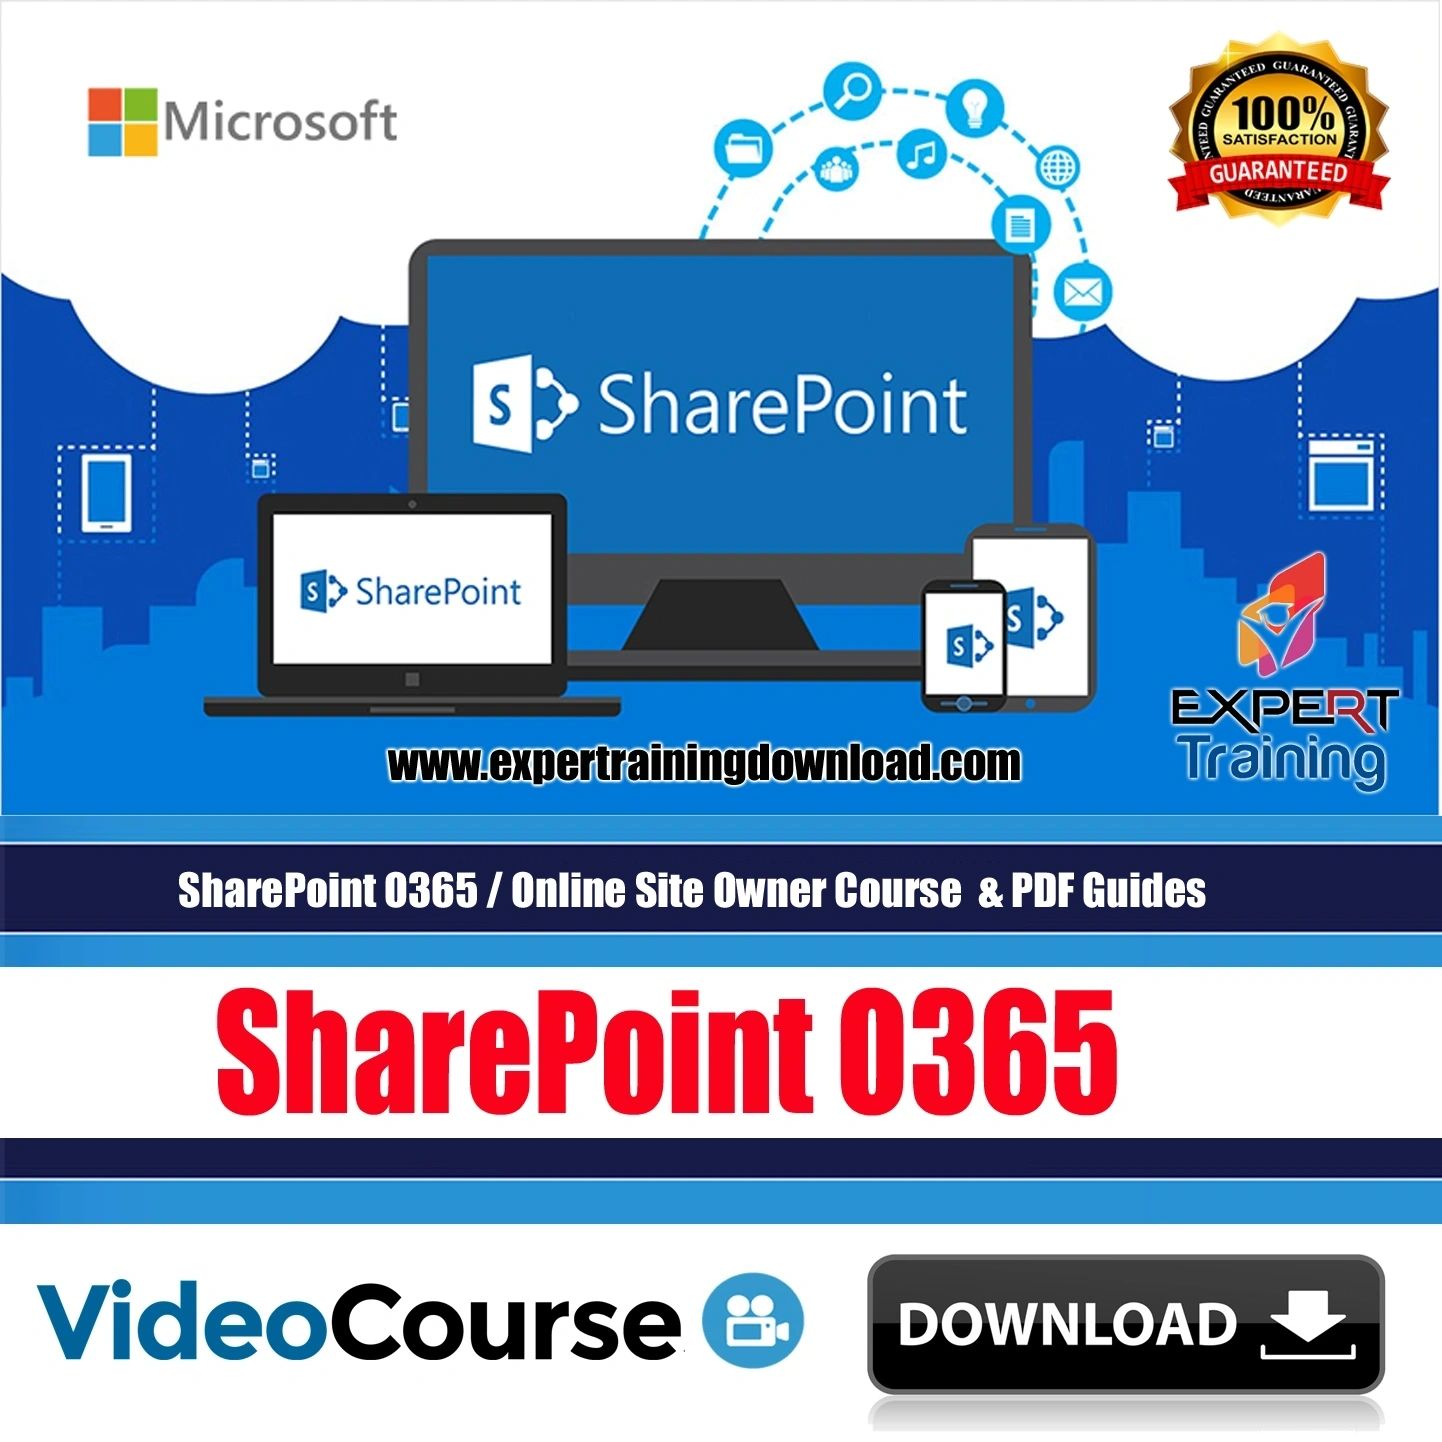 SharePoint 365 Online Site Owner Course & PDF Guides